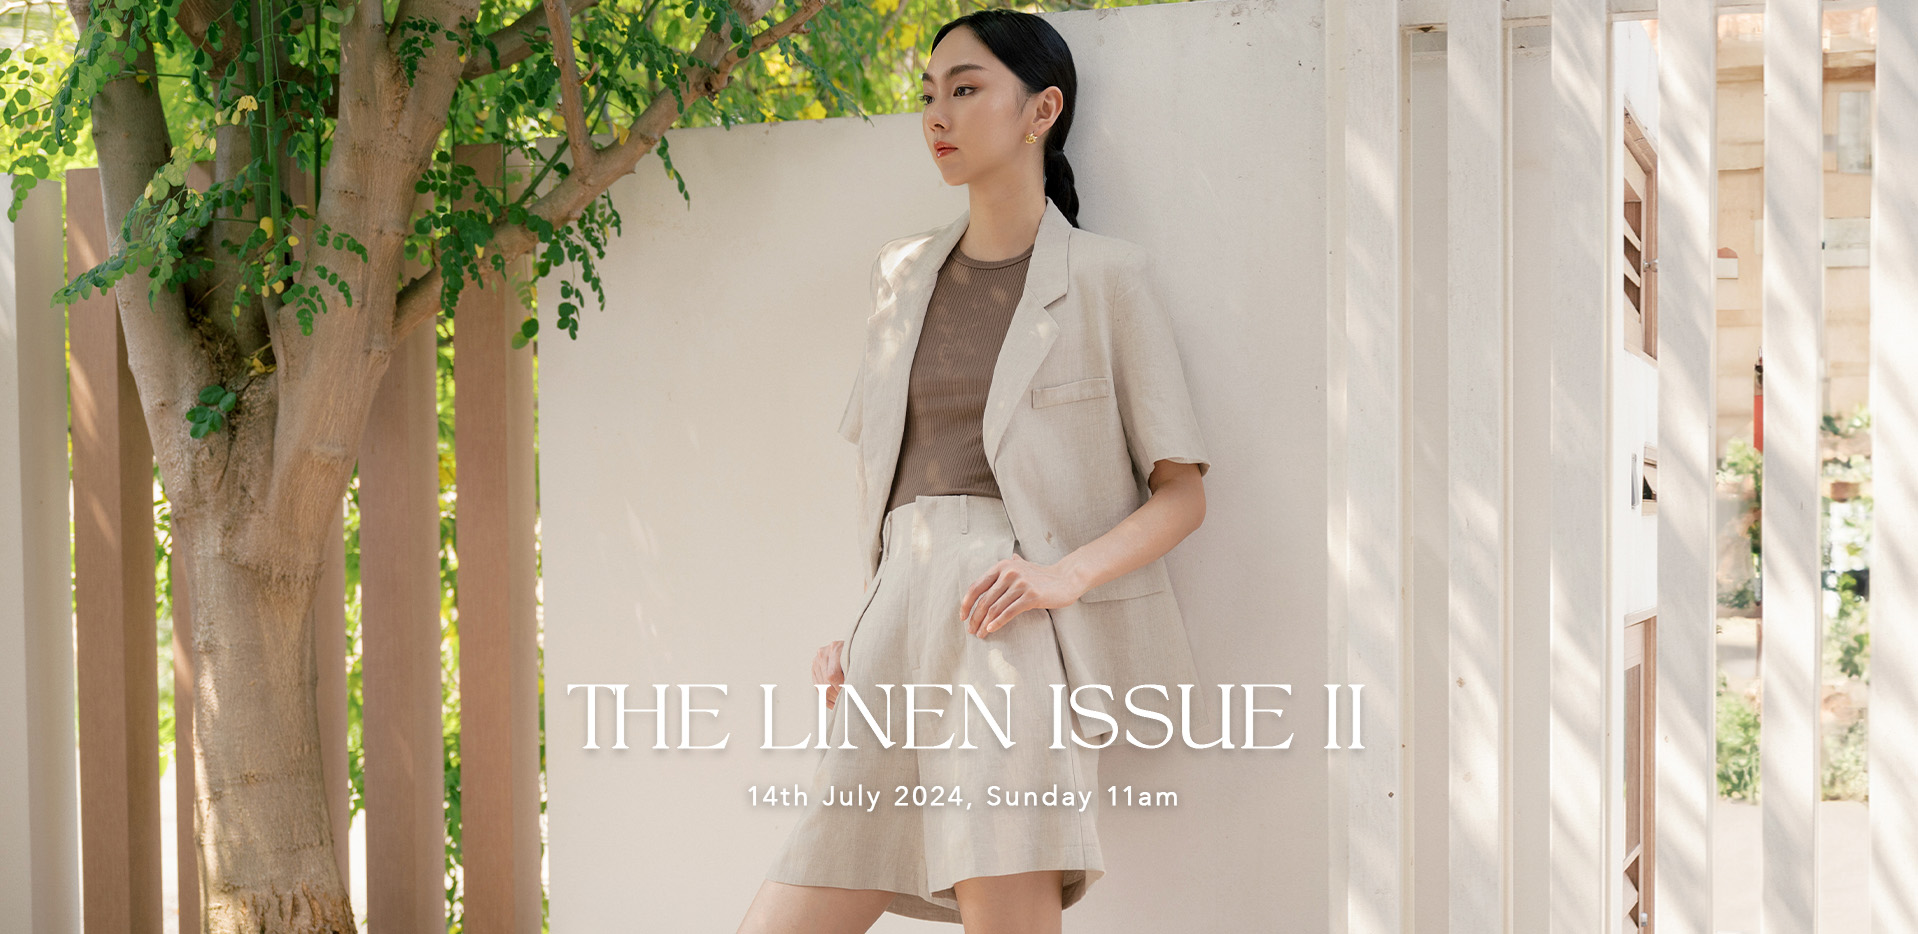 THE LINEN ISSUE II